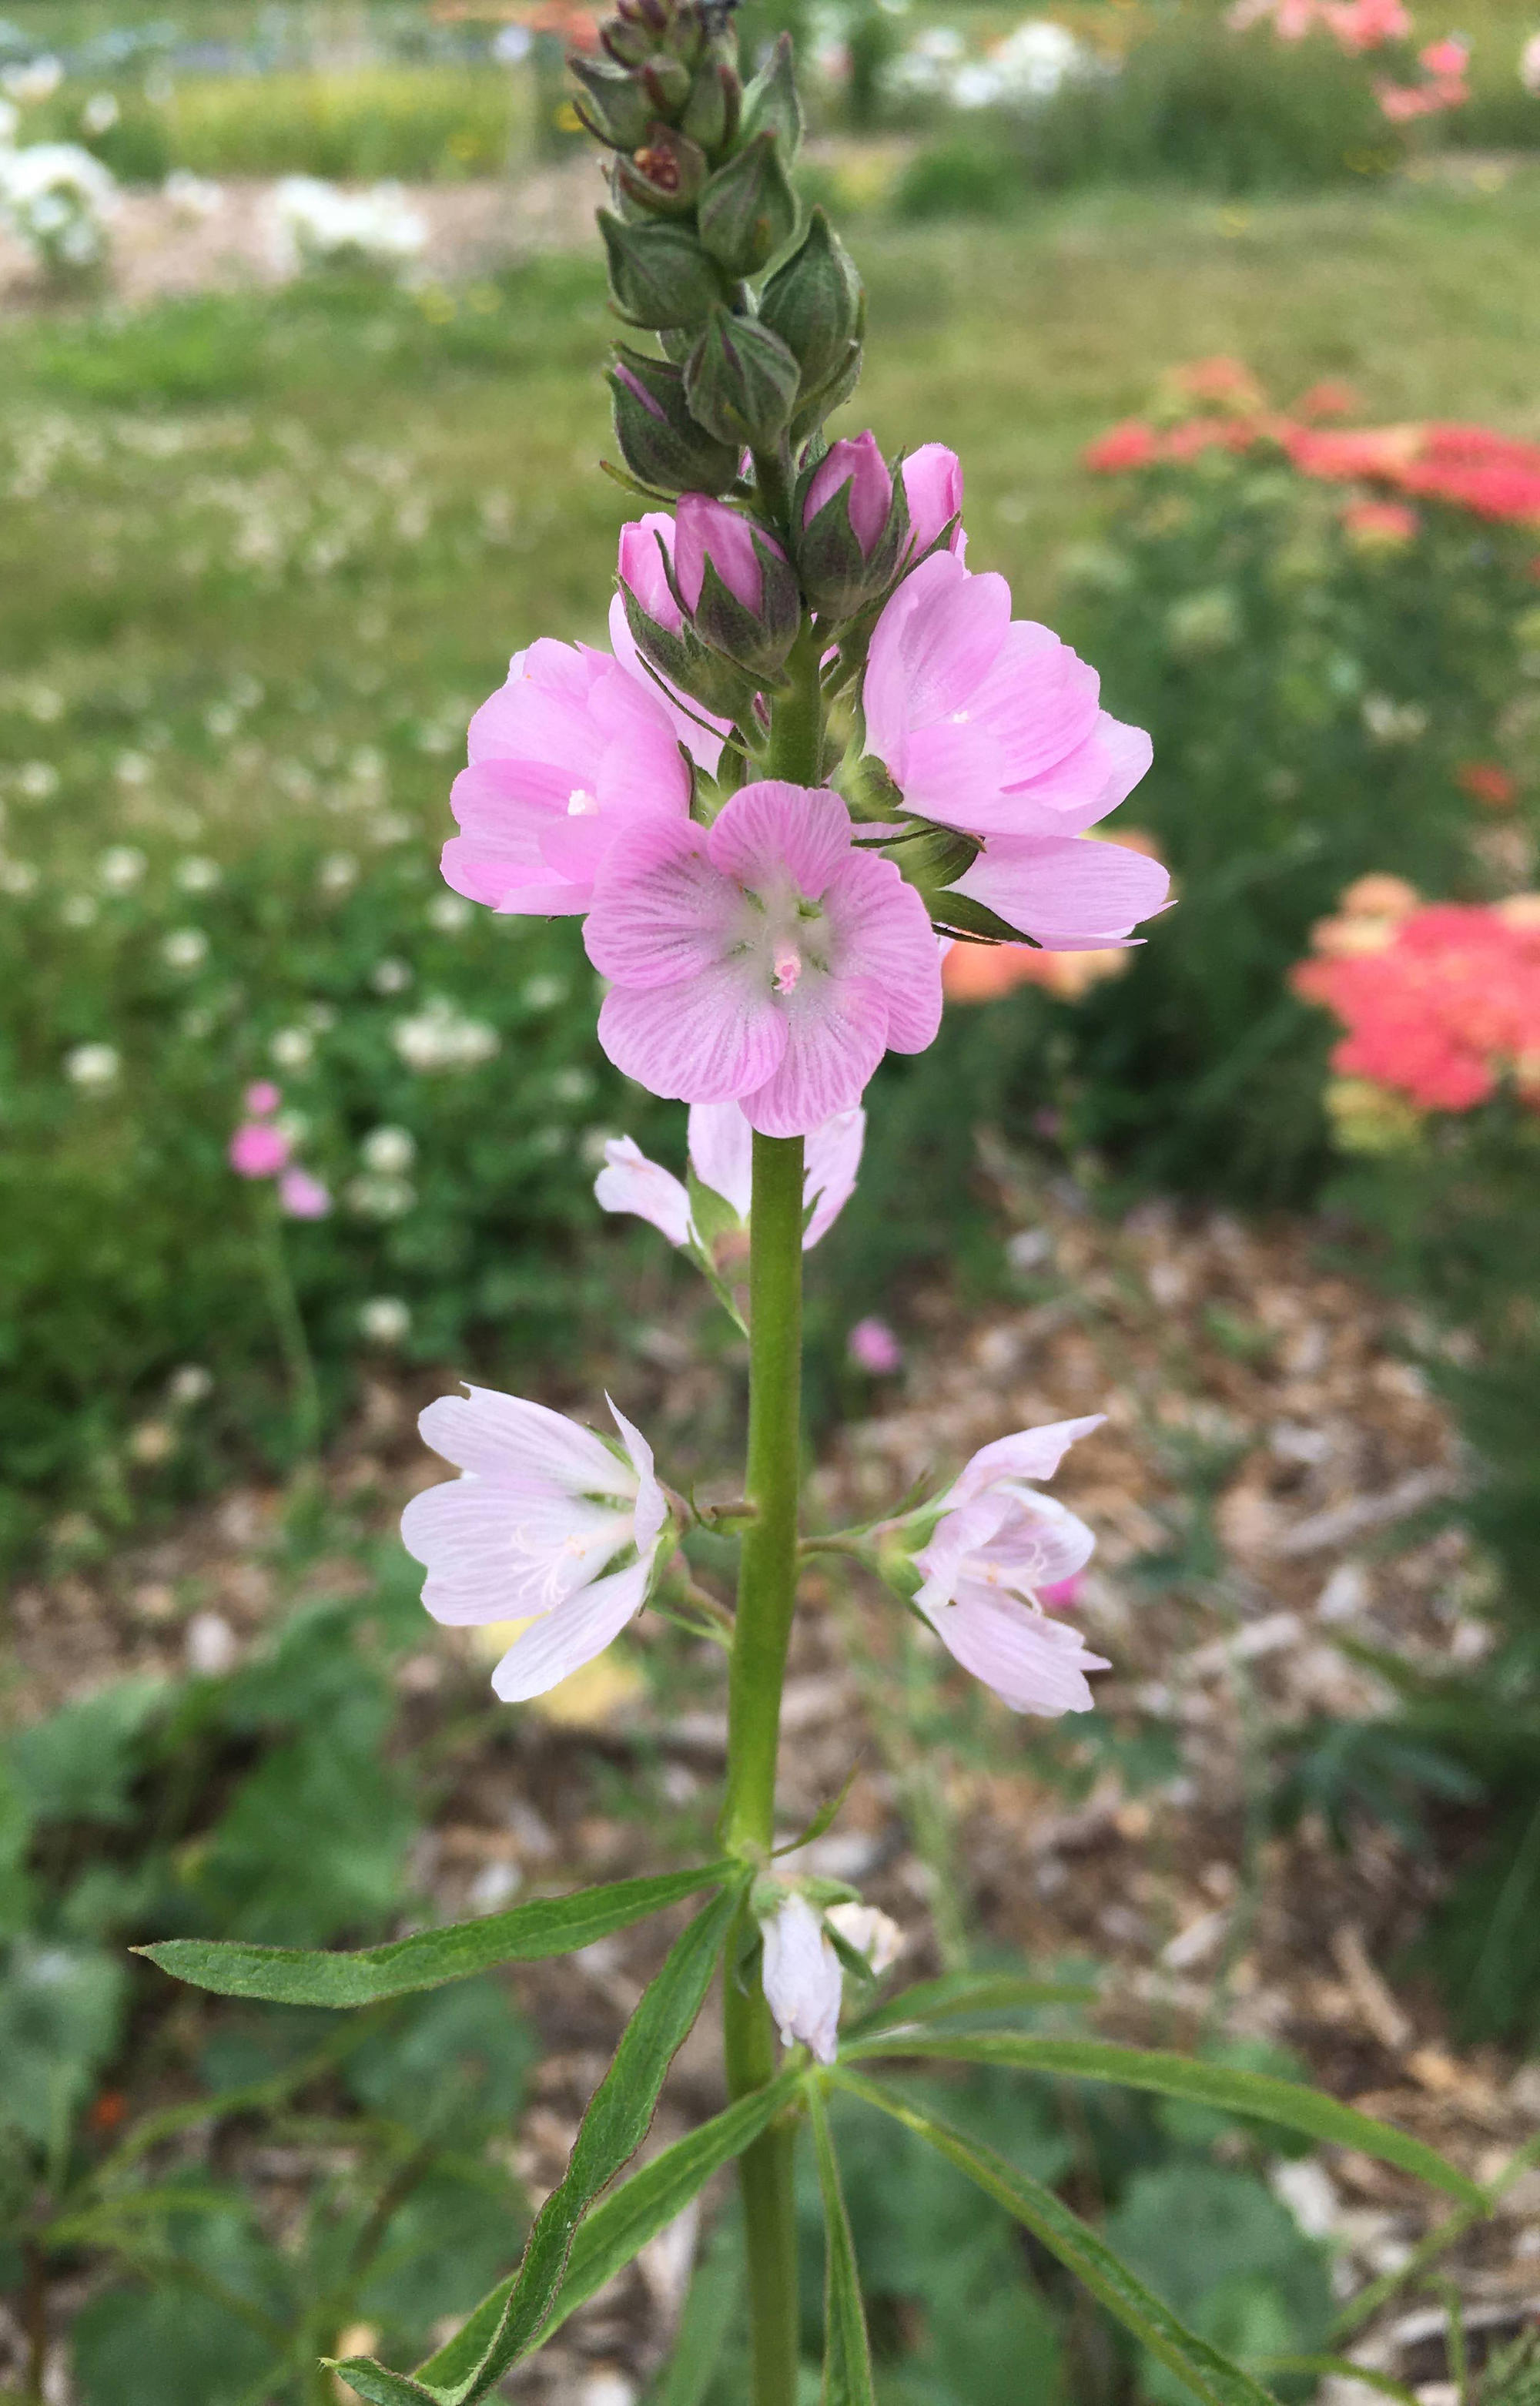 tall flower spike with pink blooms unfolding toward the top